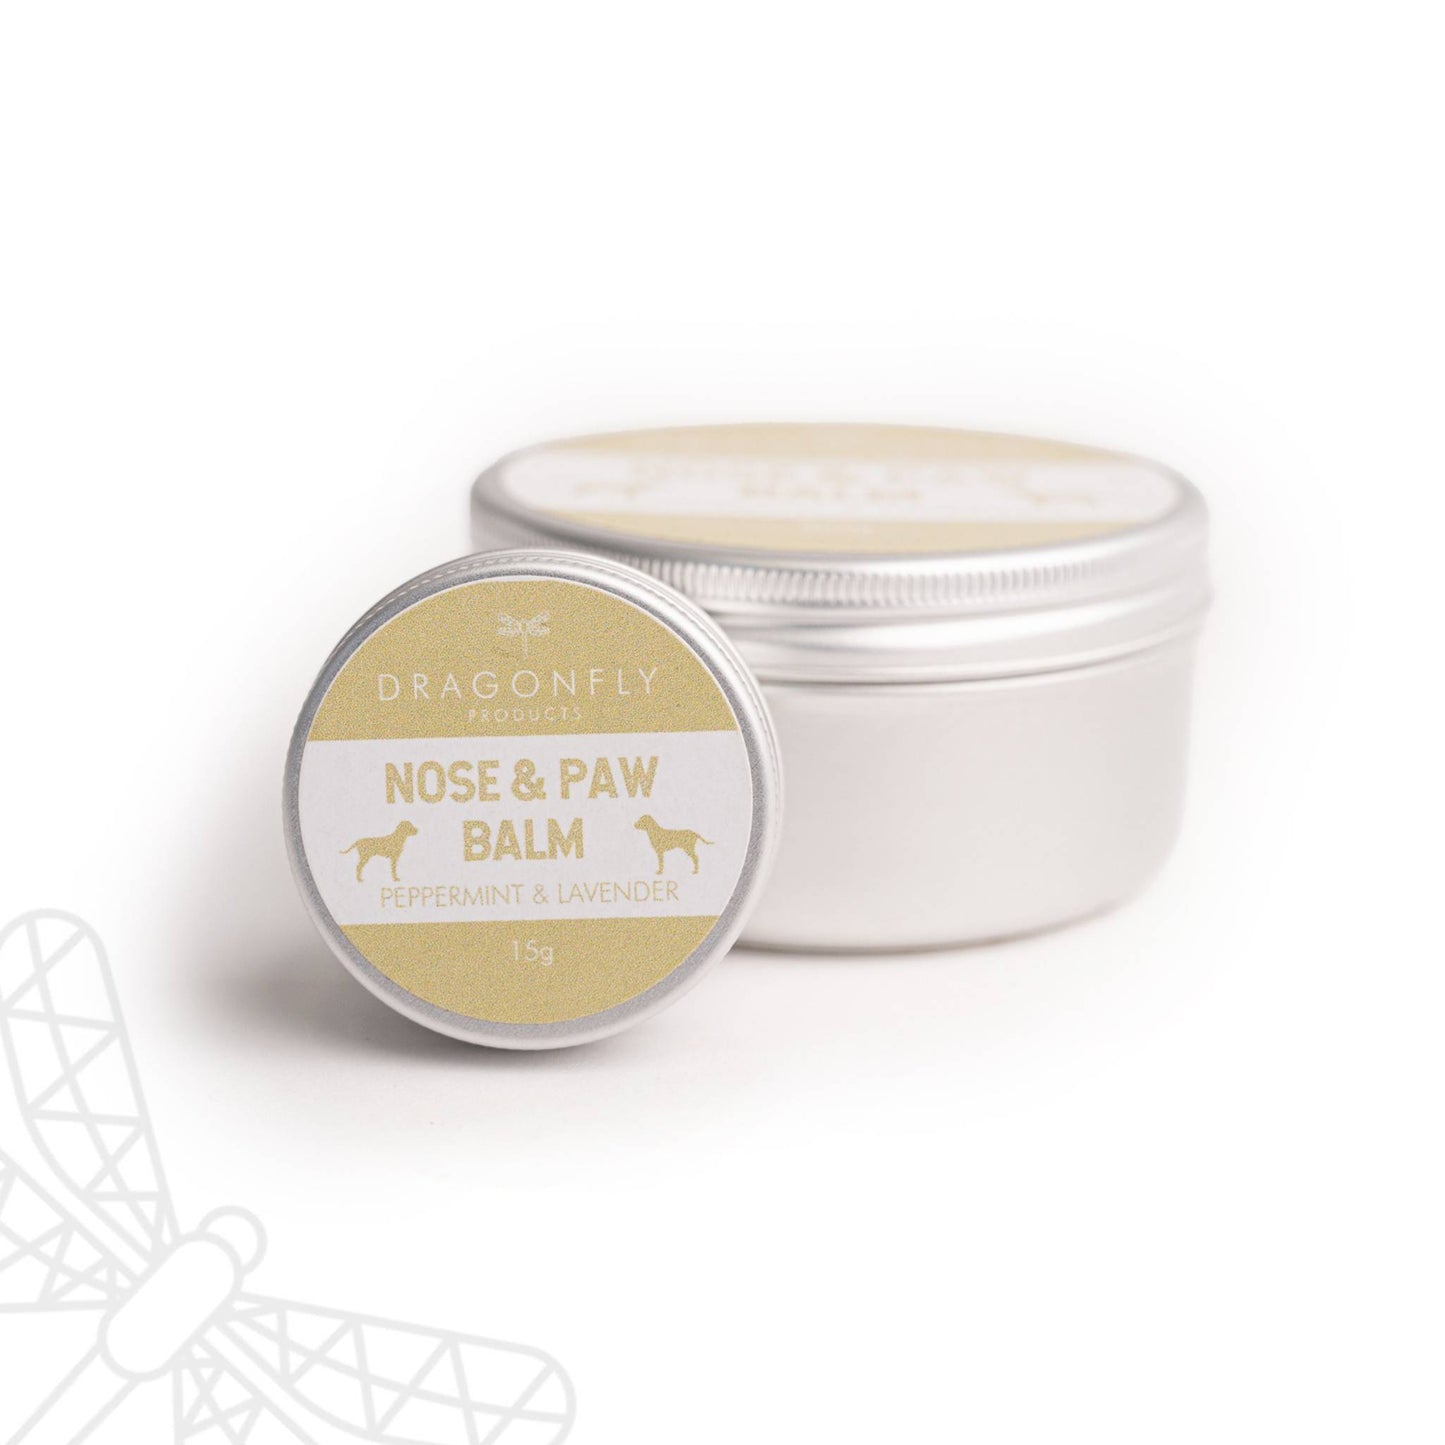 Nose and paw balm for dogs